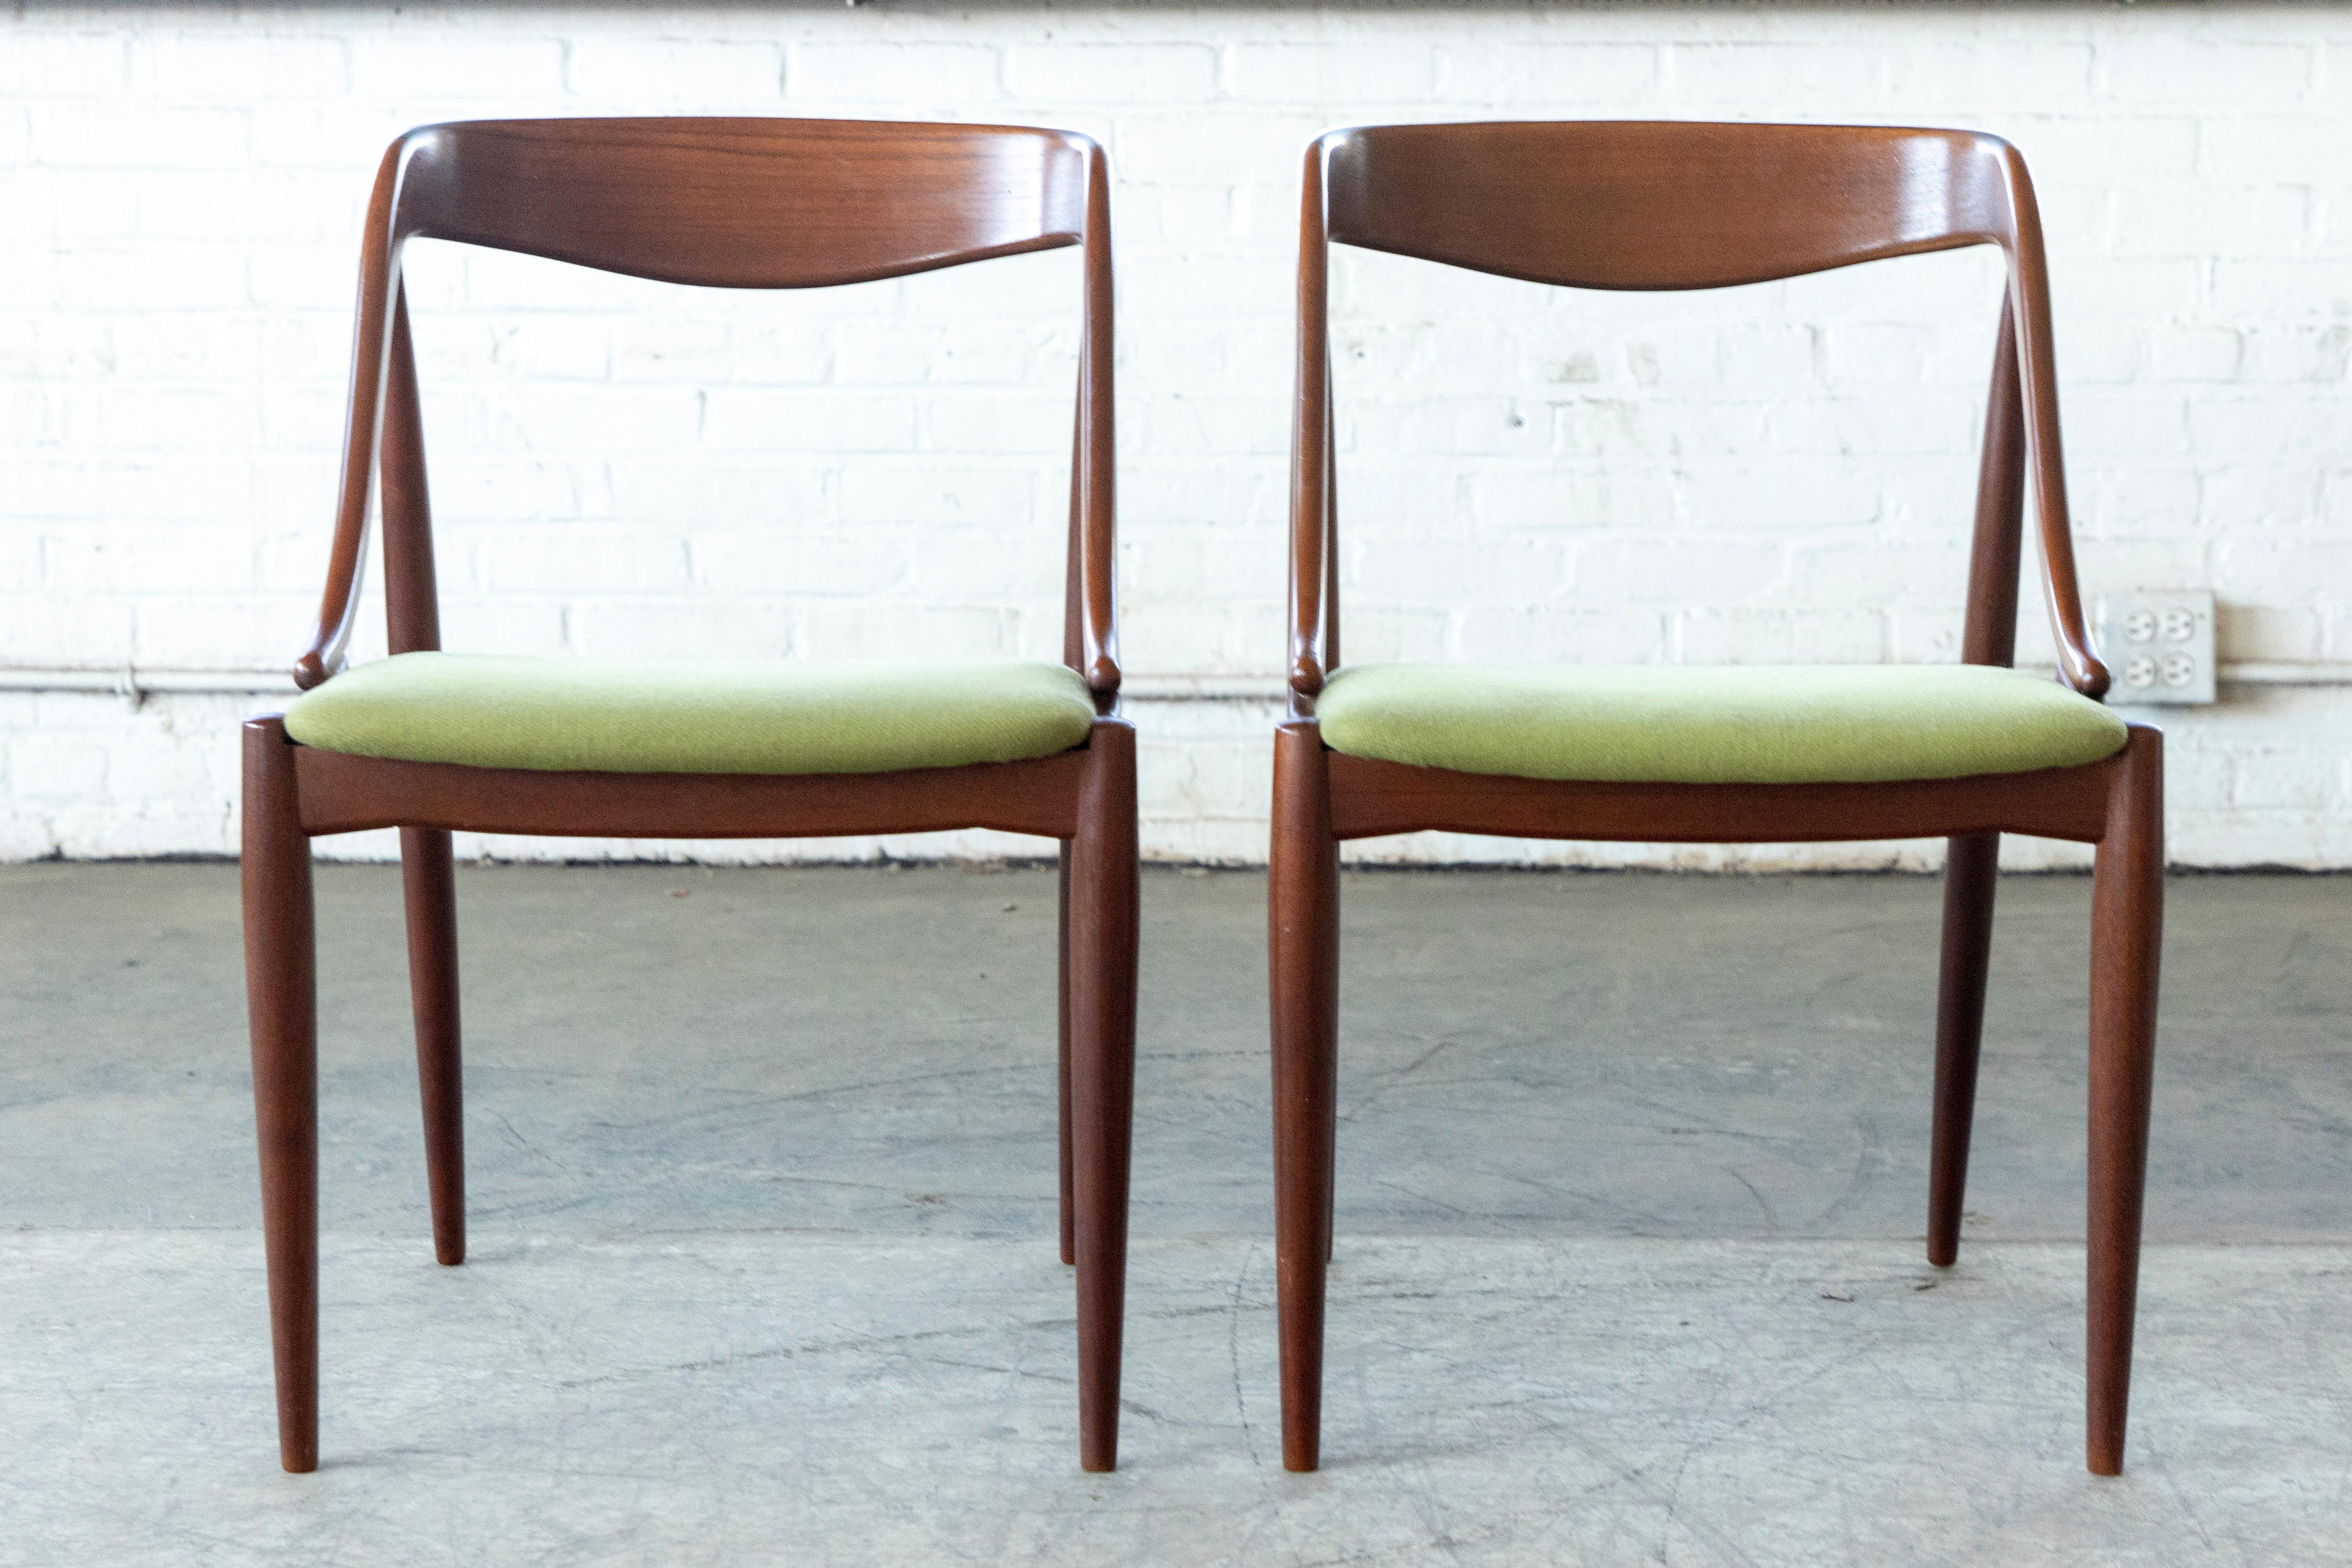 Fantastic pair of of armchairs or desk chairs designed by Johs. Andersen in the 1950's for Uldum in Denmark. Rare model sought after and perfect accent chairs or desk chairs for any modern home. Made of solid teak. We are able to re-upholster at a